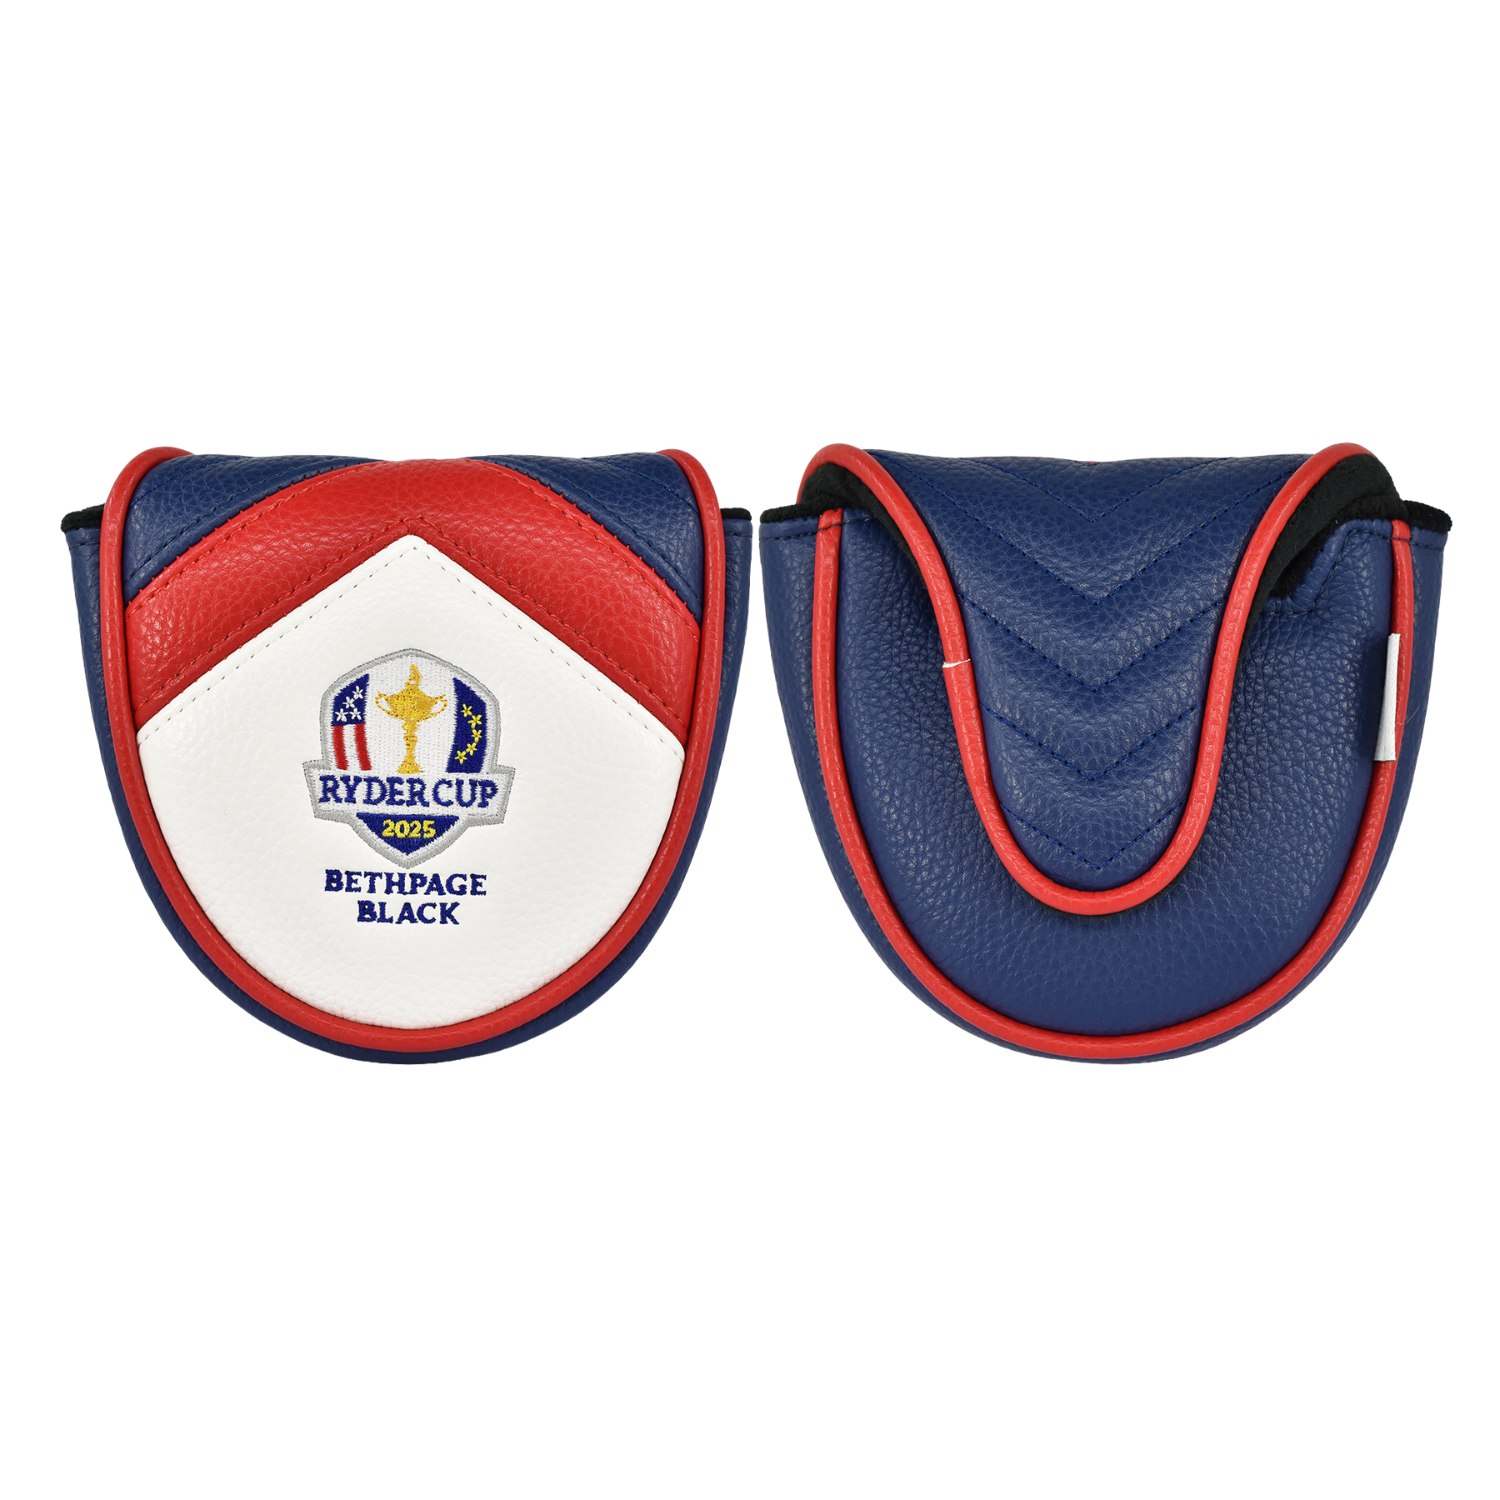 PRG Americas 2025 Ryder Cup Elite Mallet Cover - Front and Back View